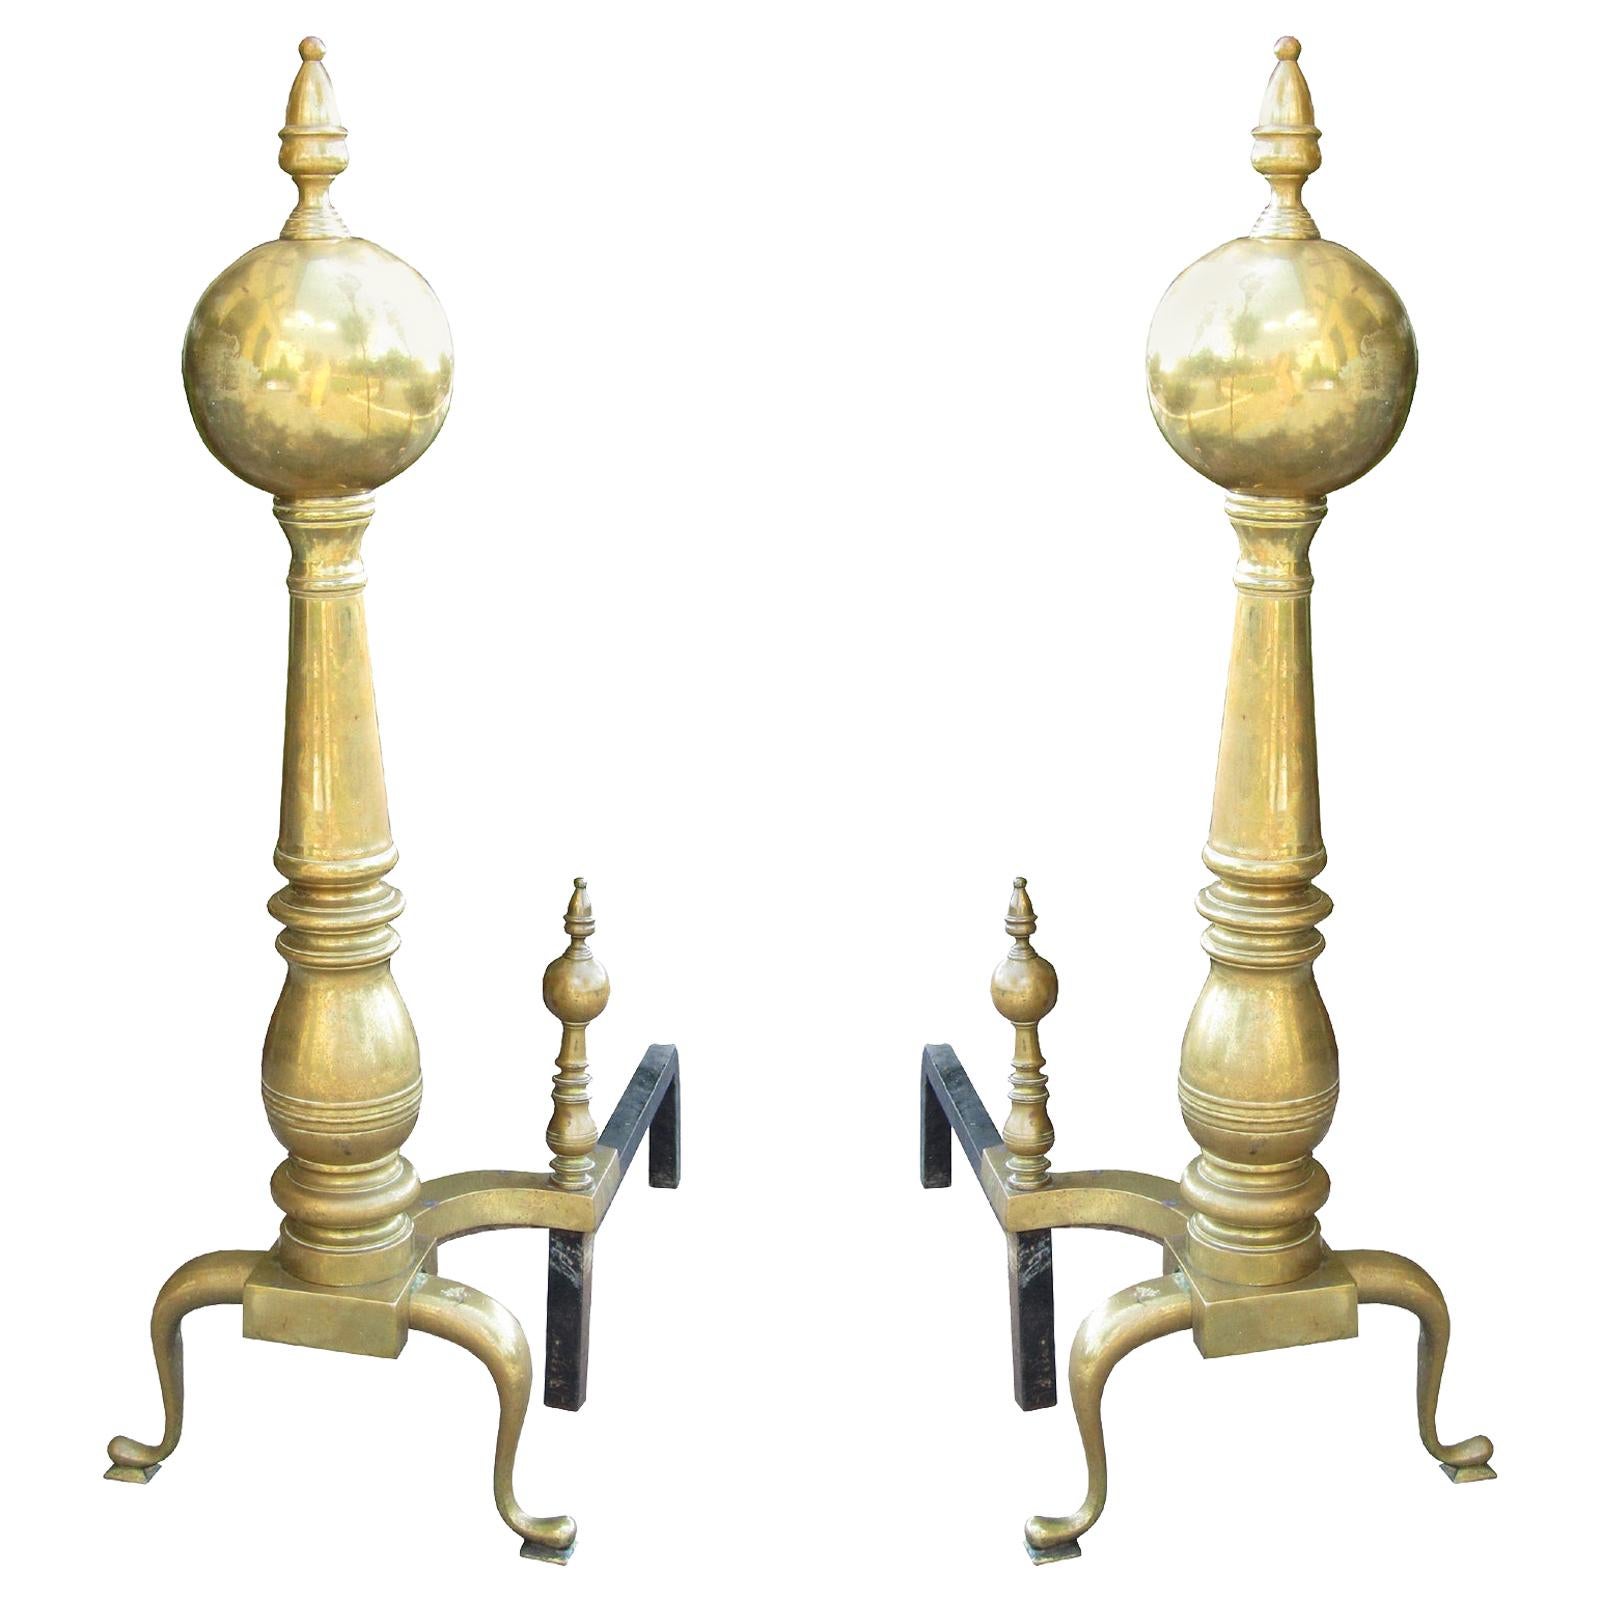 Pair of 19th-20th Century Large Scale American Brass Andirons with Ball Finials For Sale